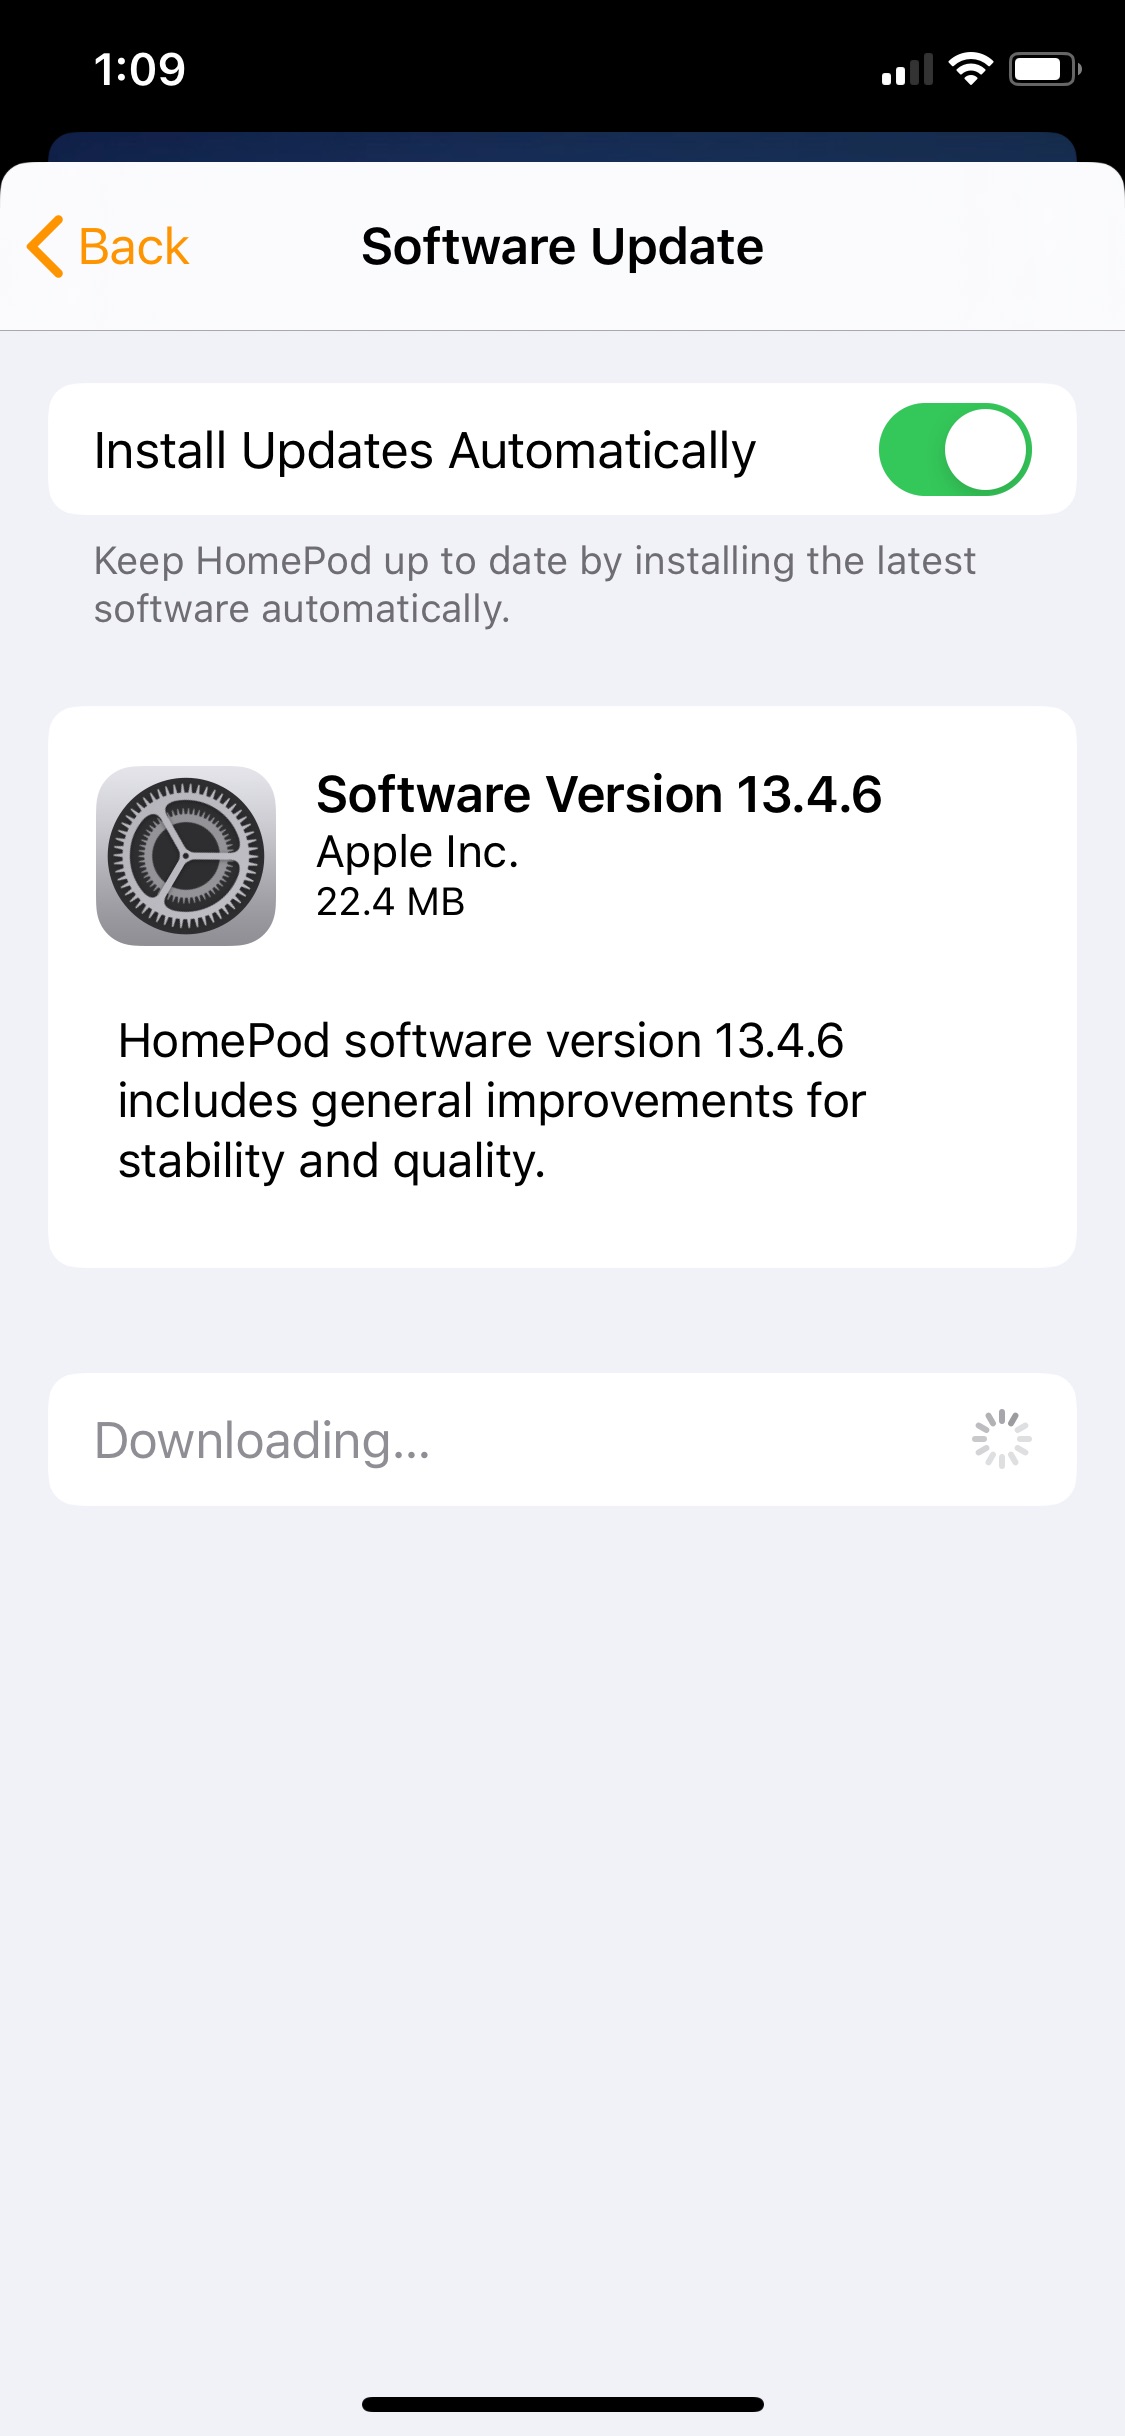 Apple Releases HomePod Software Version 13.4.6